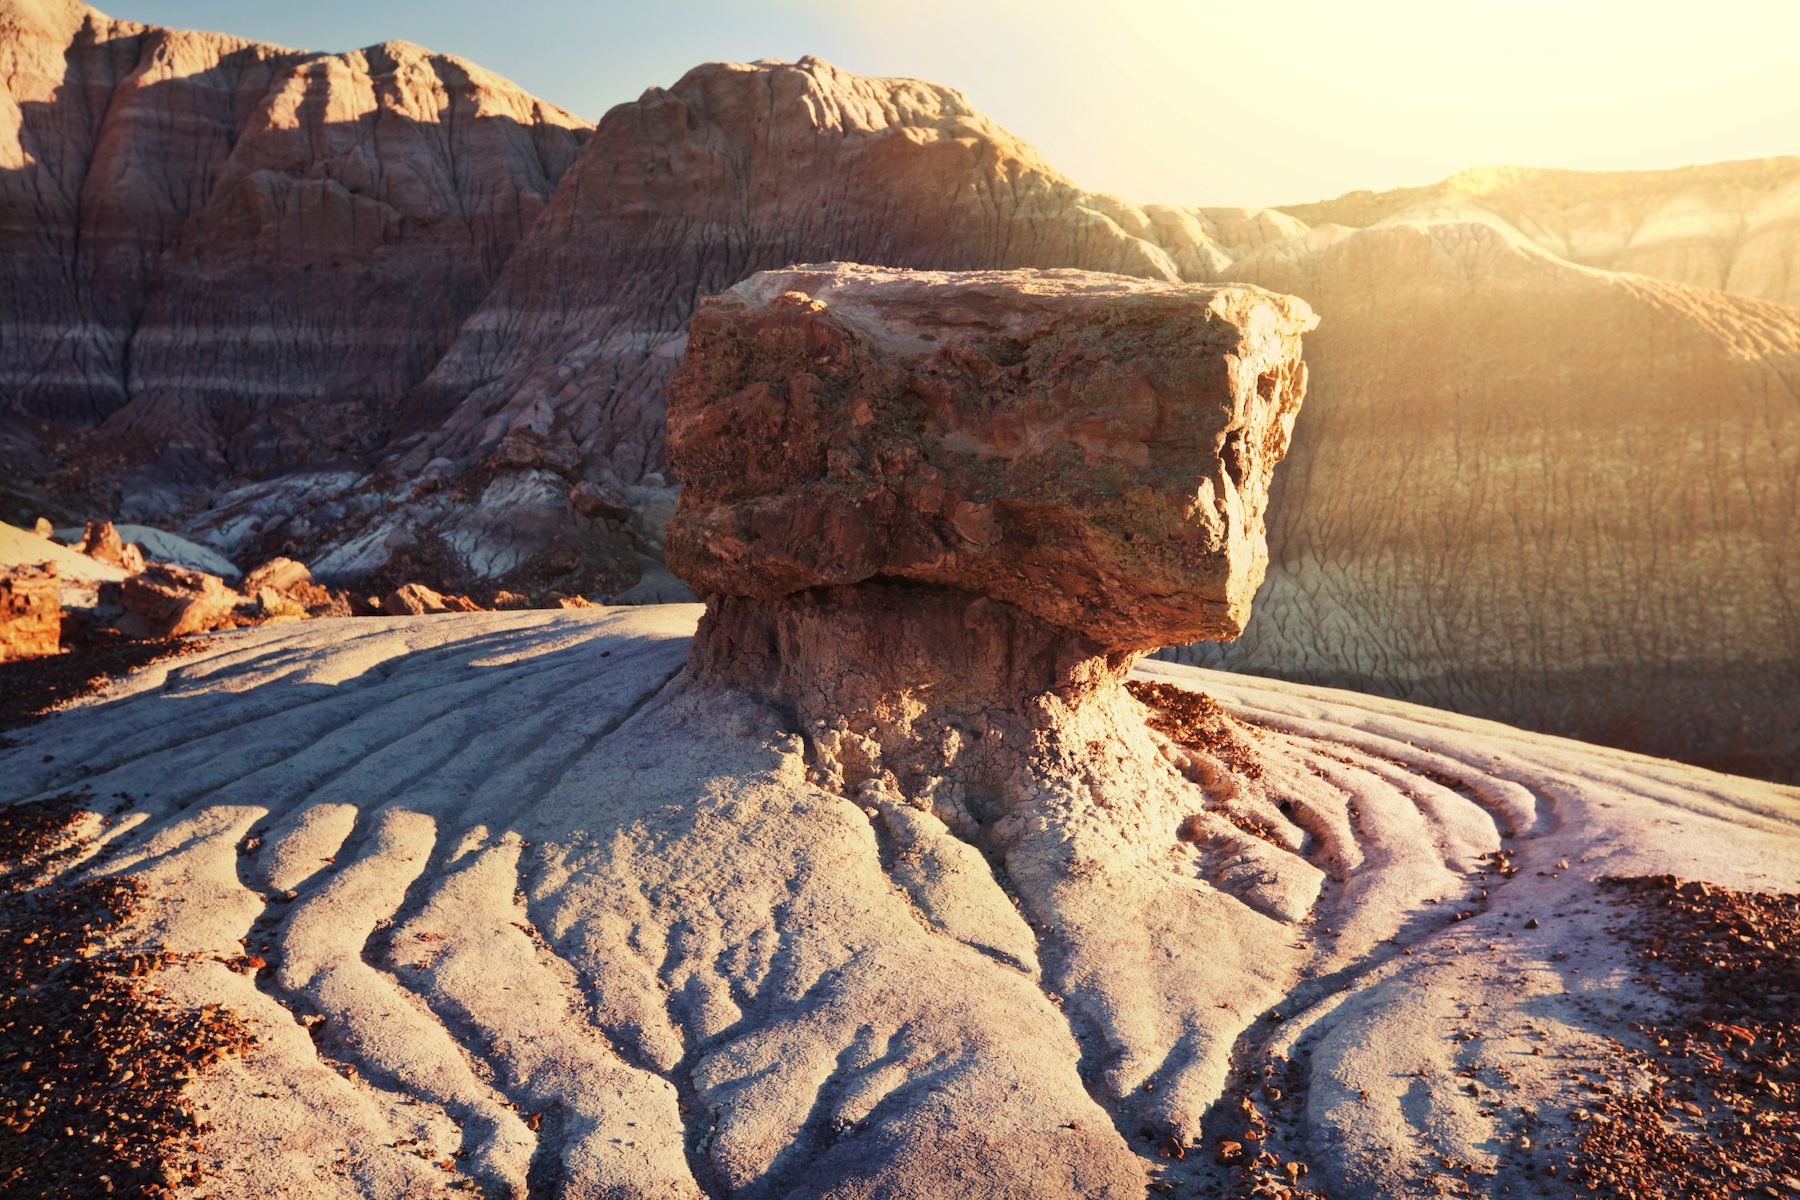 A lone rock formation sits in the foreground with large cliffs shown in the background at Petrified Forest National Park, Arizona